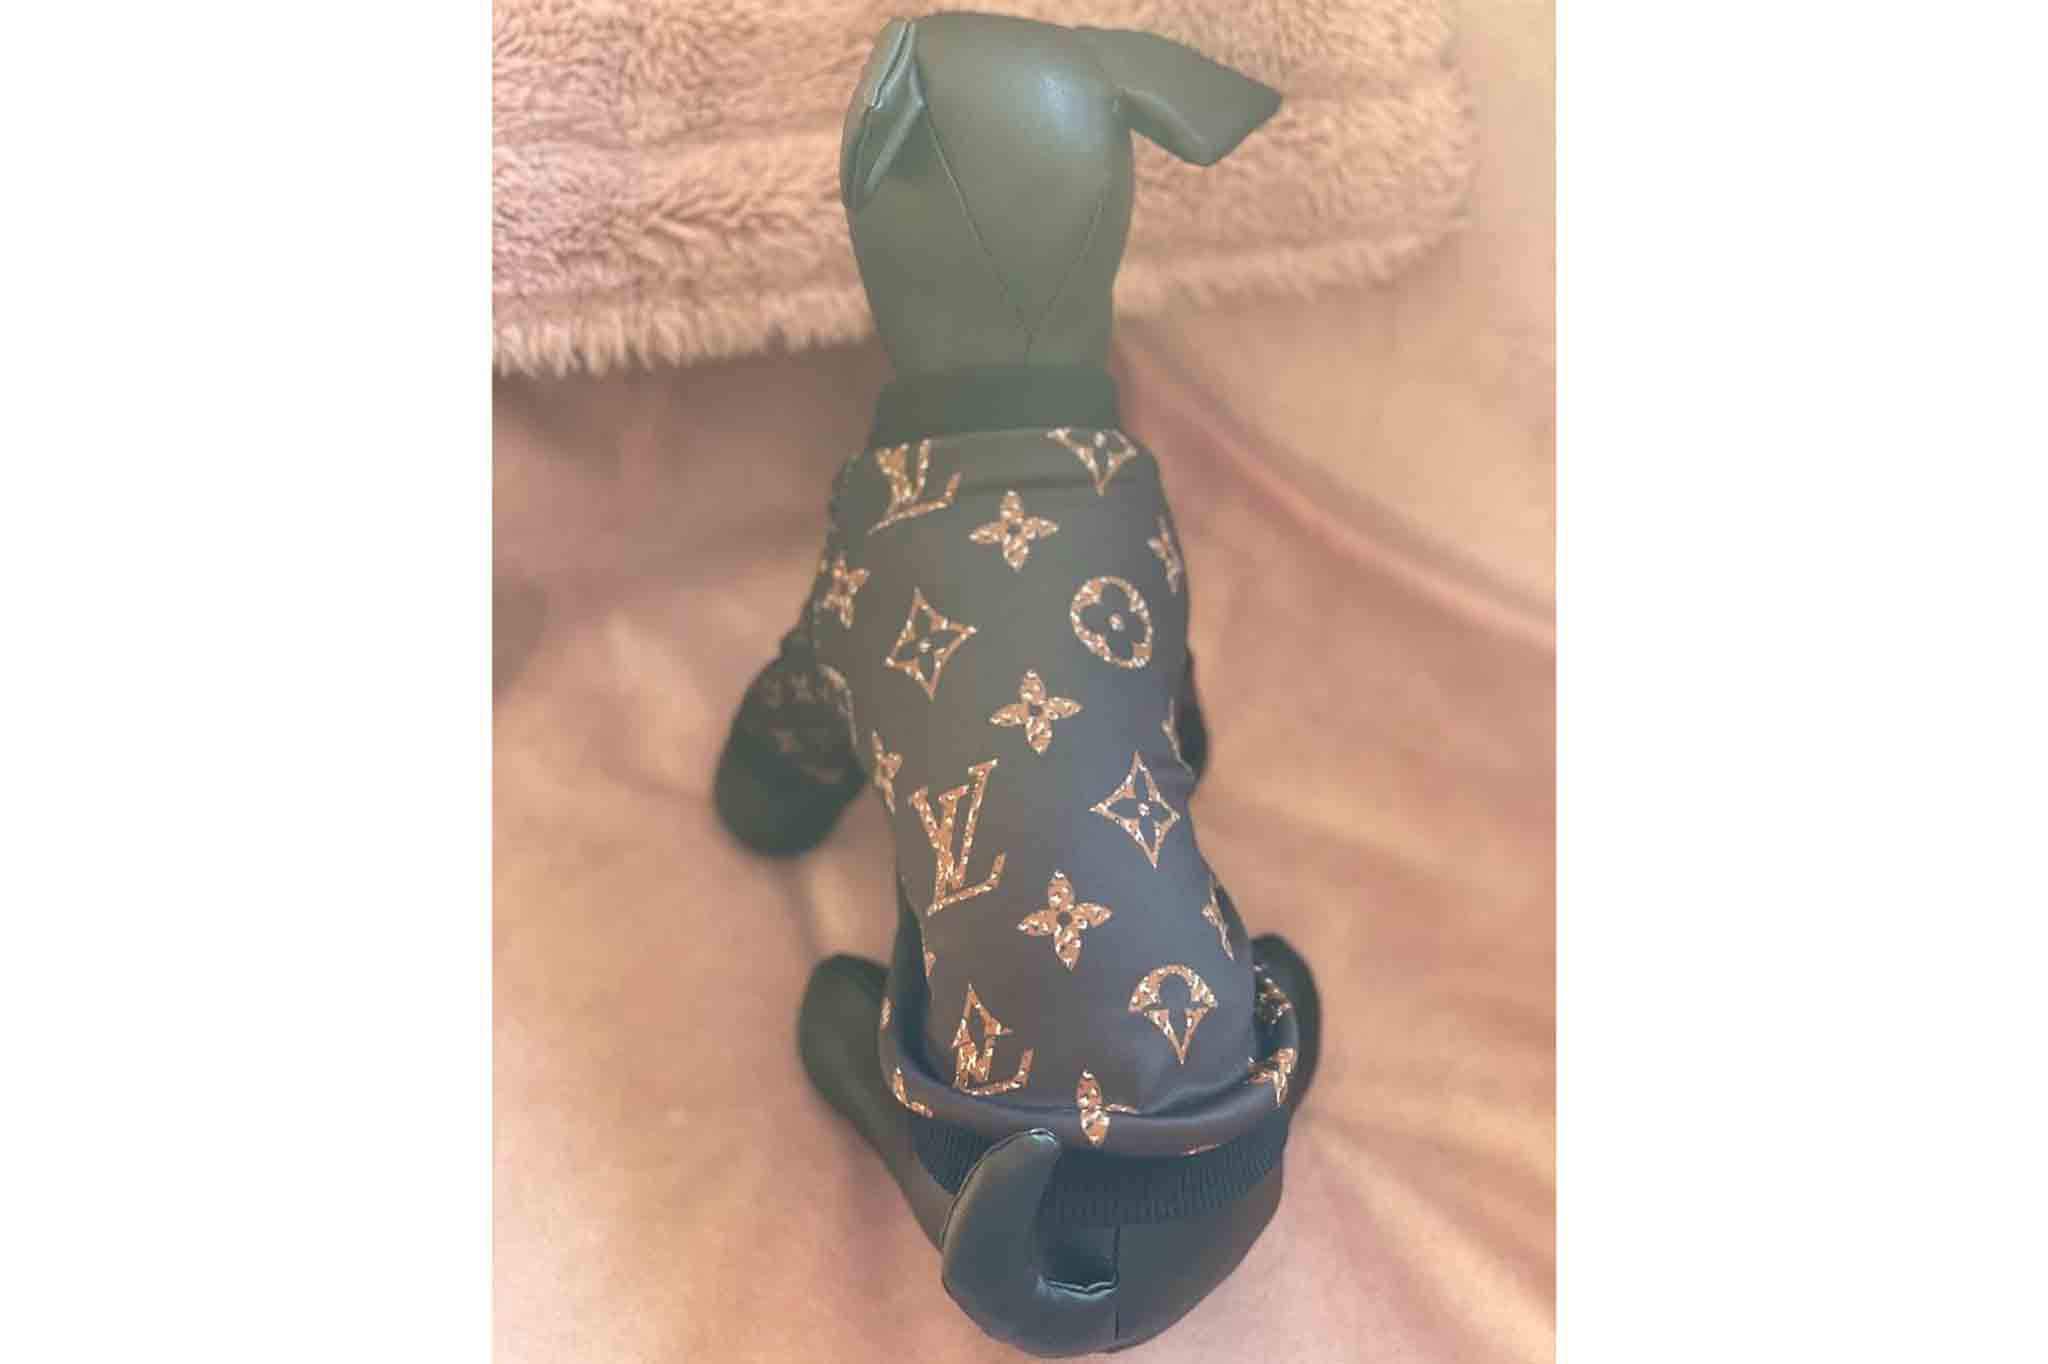 Red louis Vuitton harness for dogs